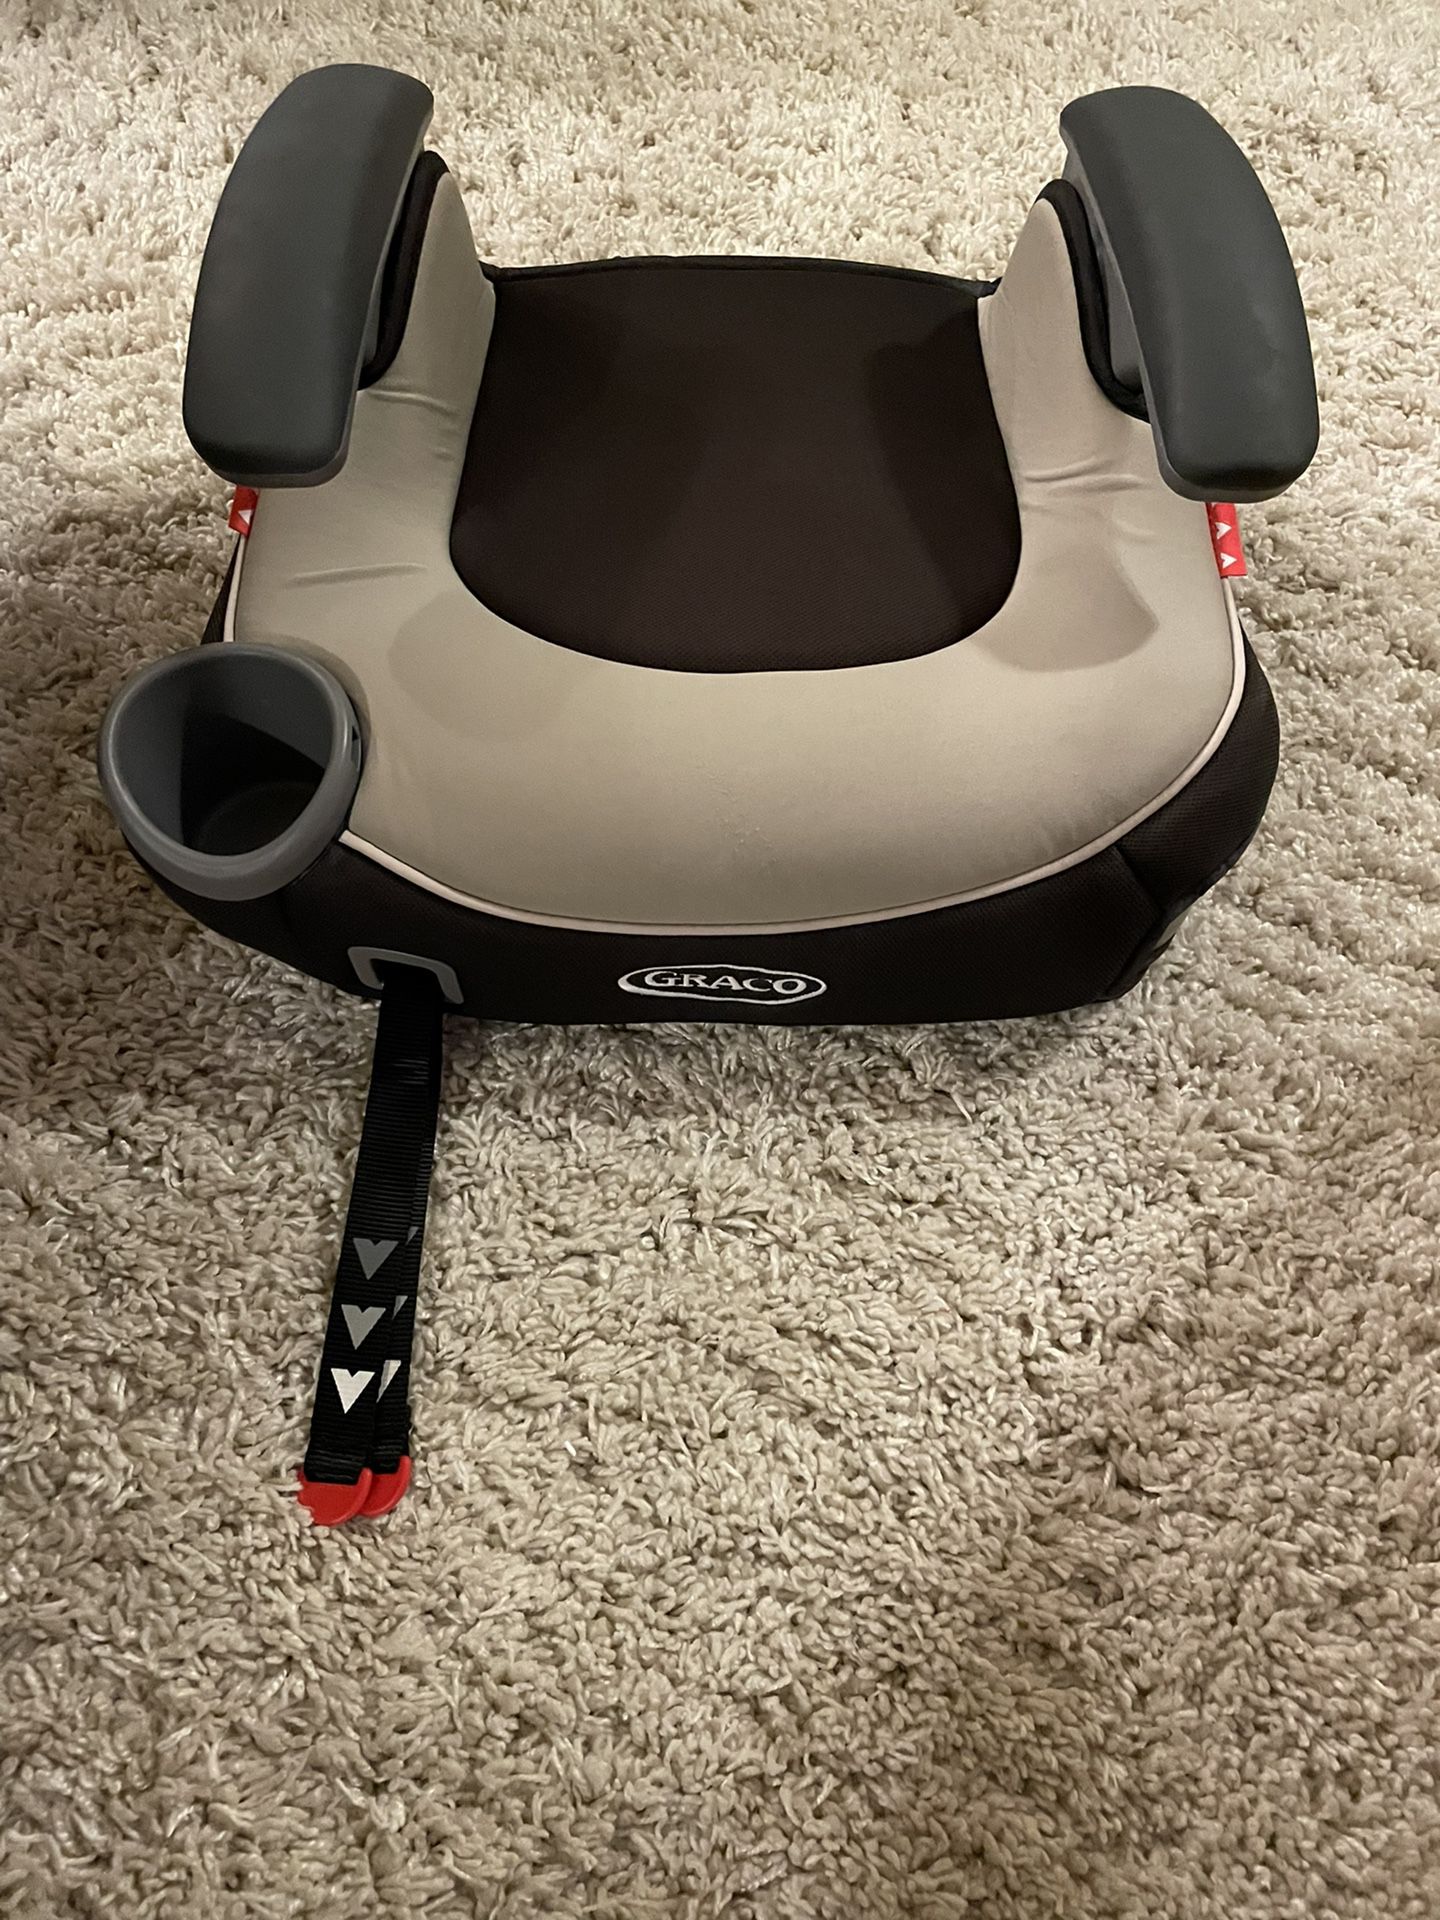  Graco TurboBooster Backless Booster Car Seat 